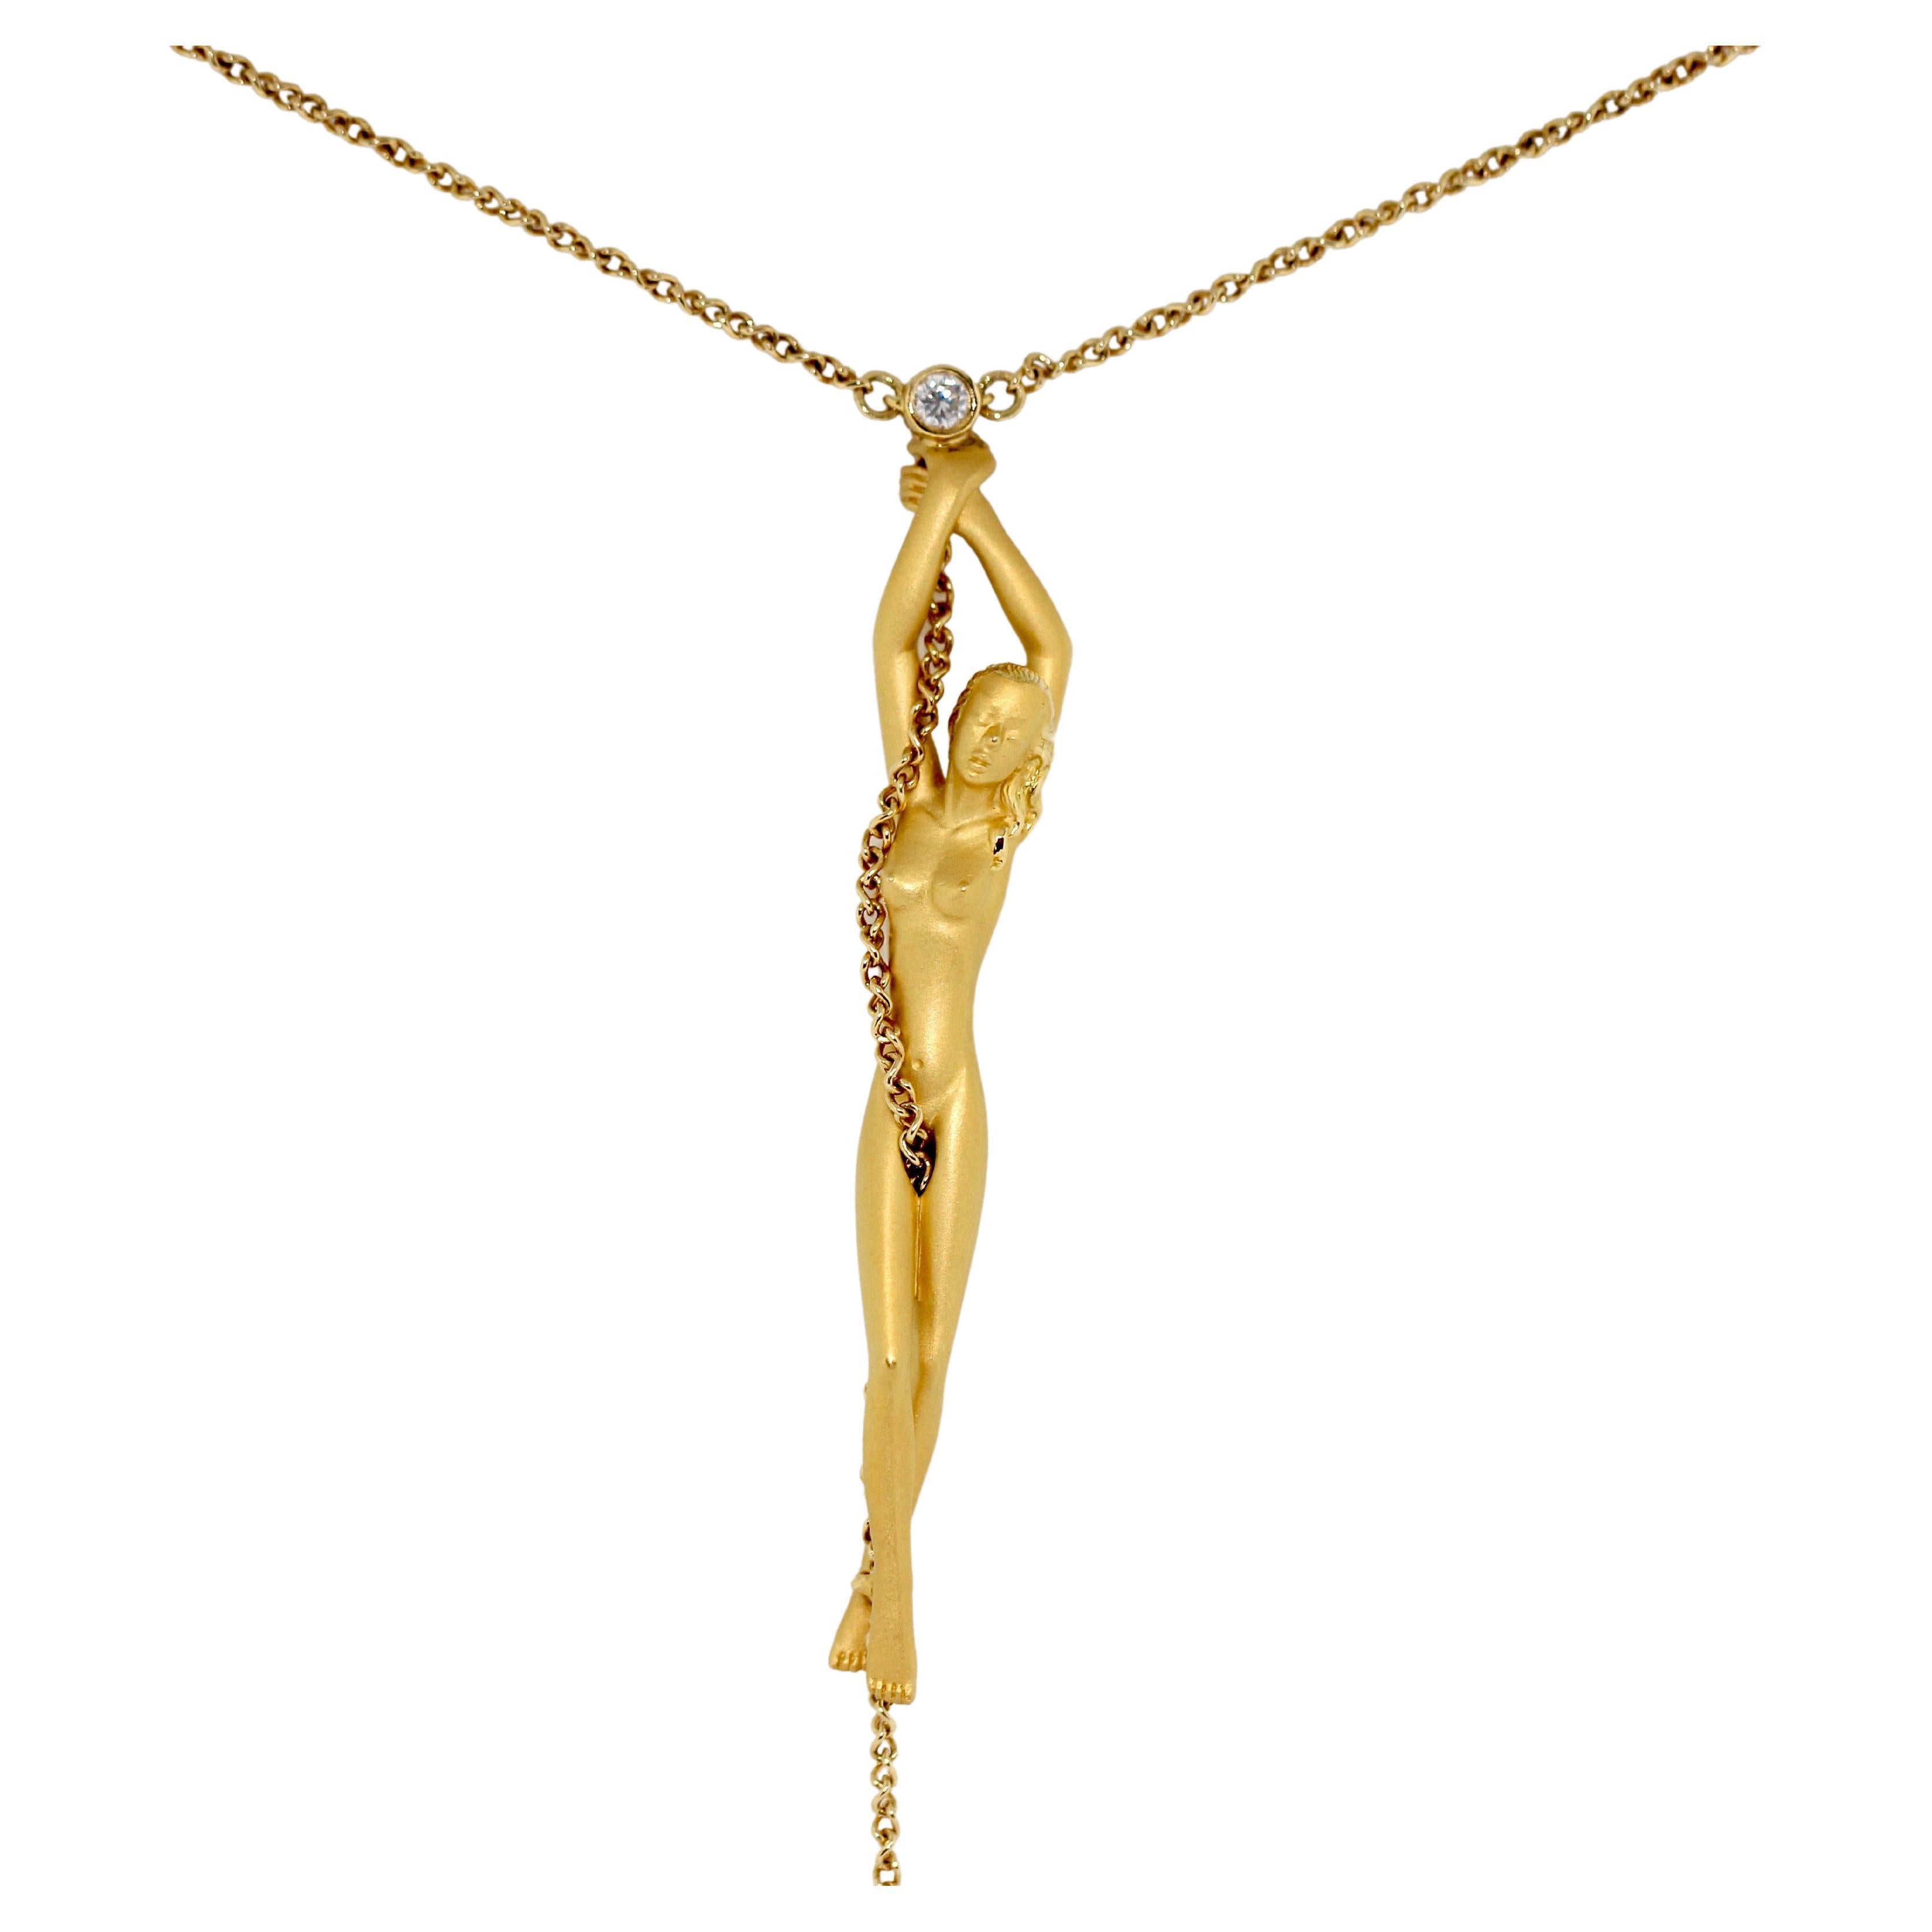 Carrera y Carrera necklace with pendant, Nude Woman, 18 Karat Gold with Diamond For Sale